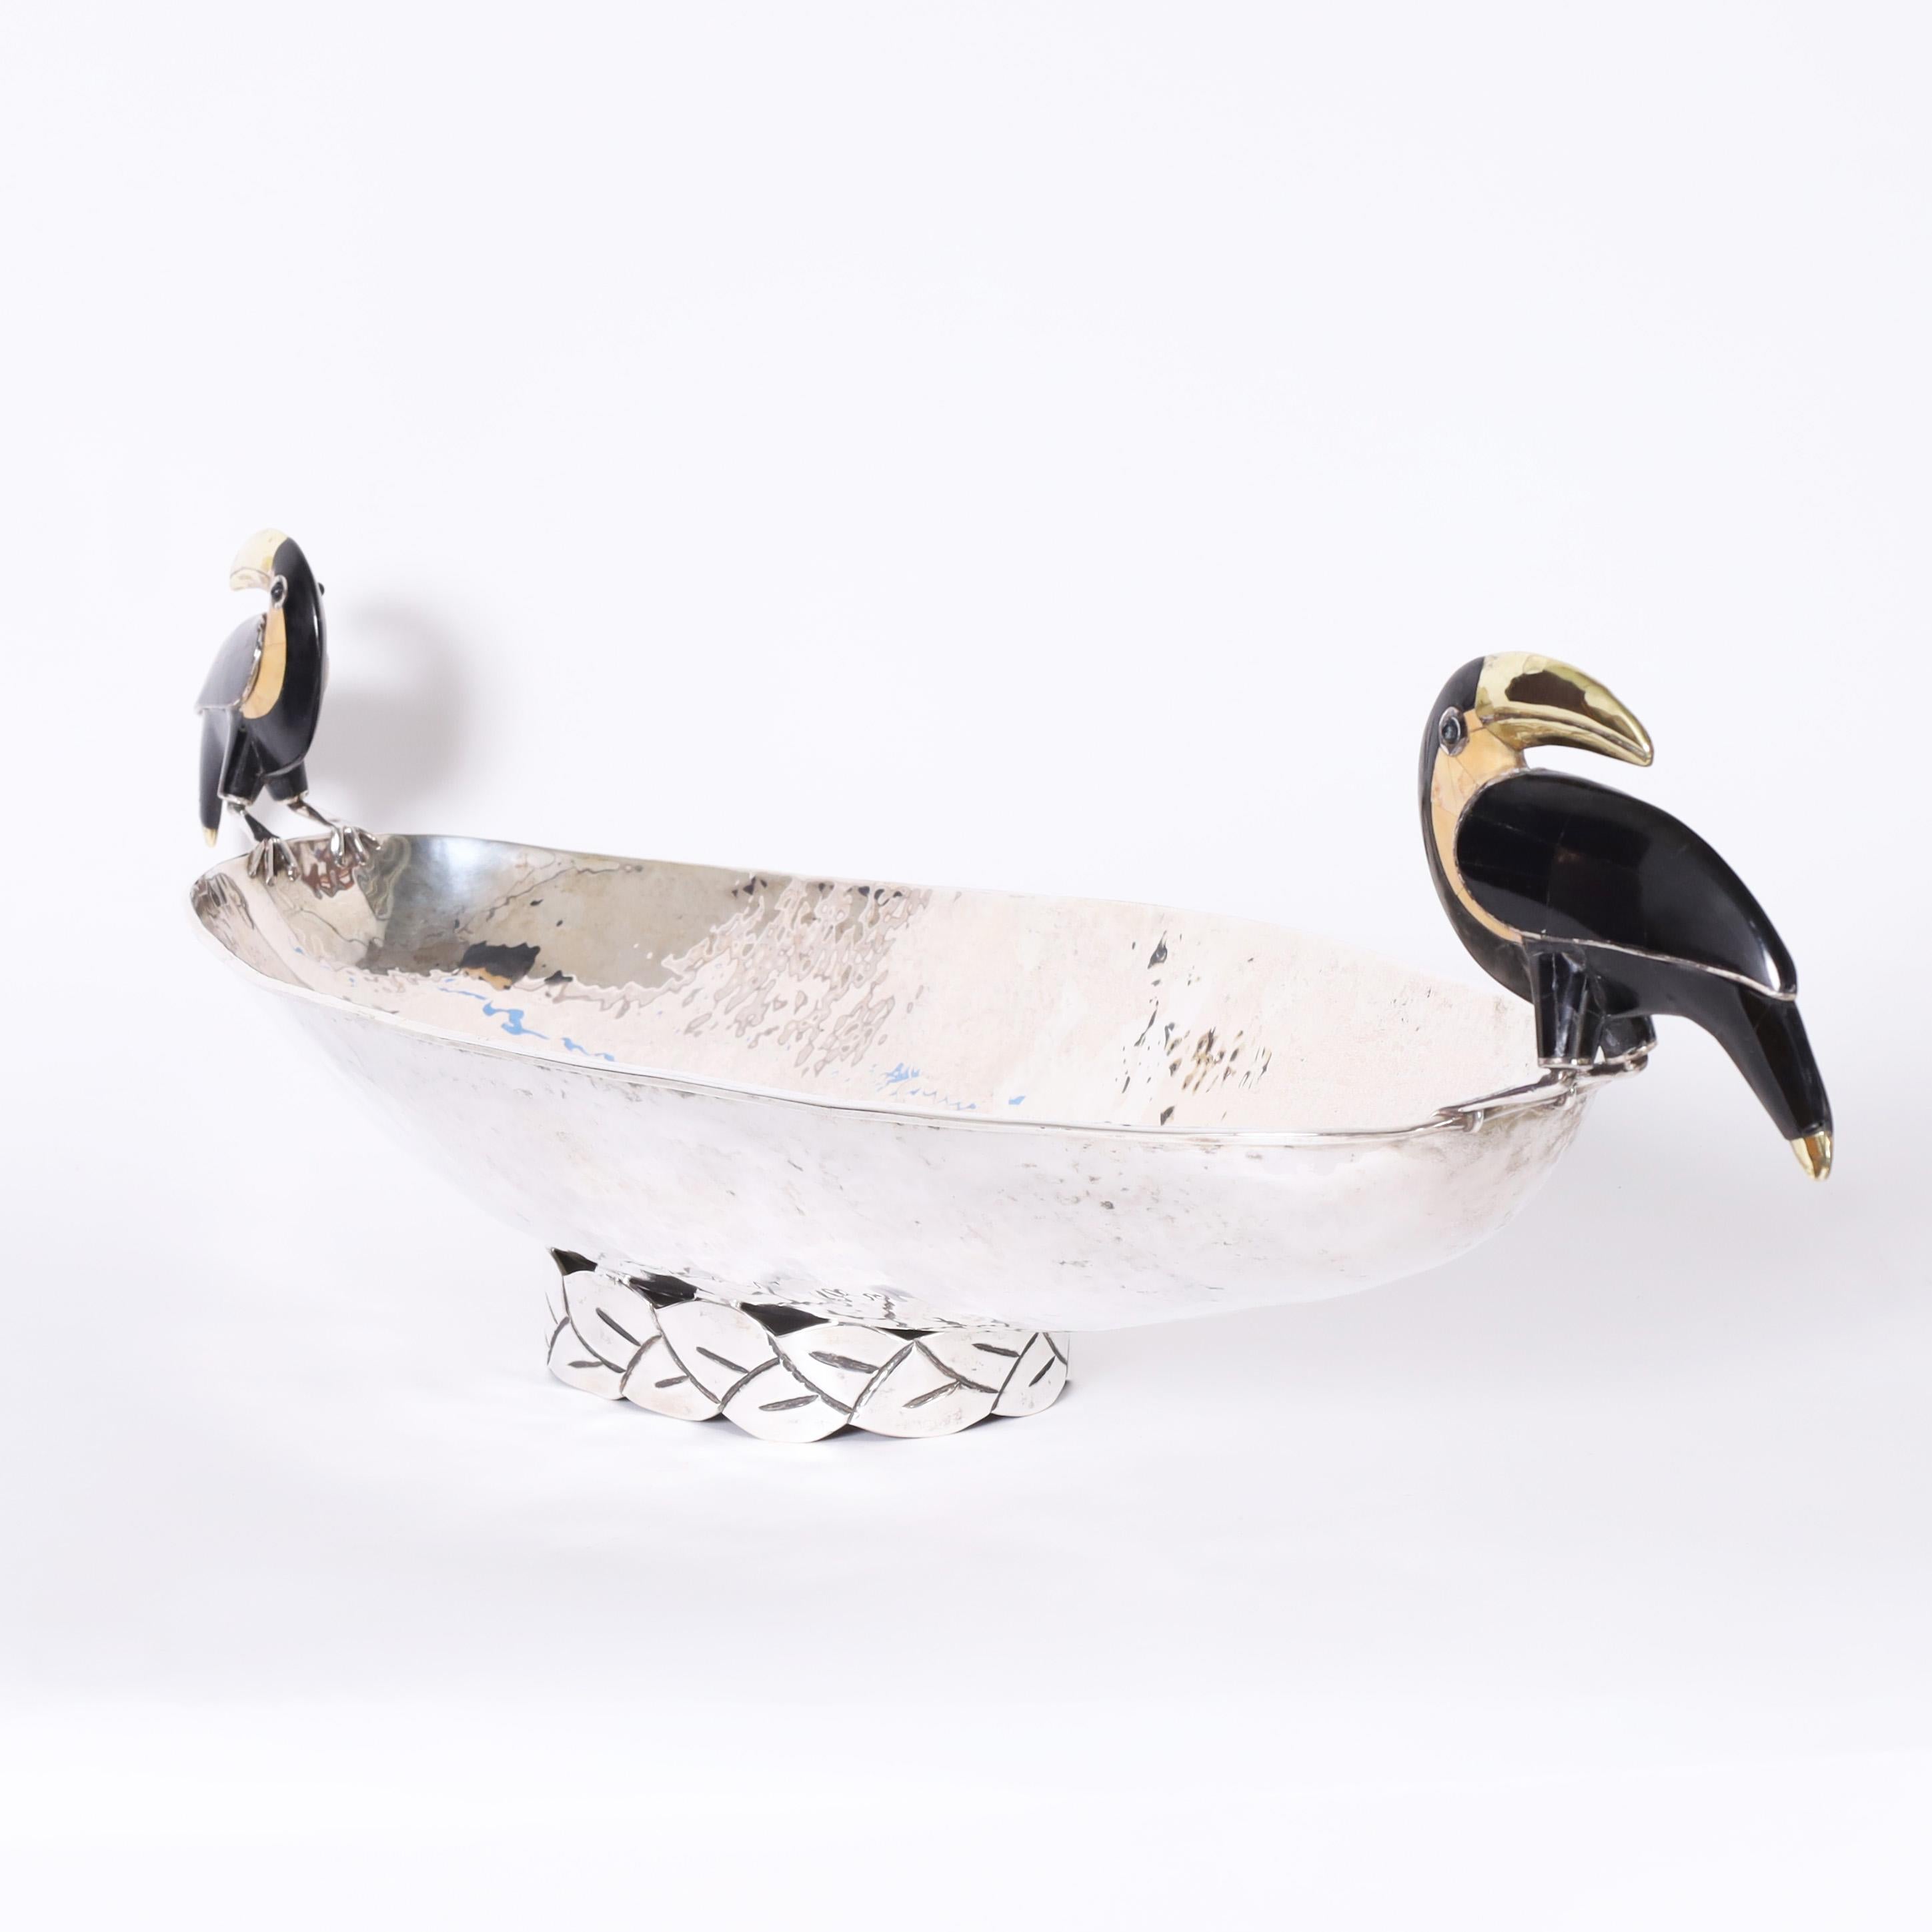 Striking vintage bowl with an elongated form handcrafted in silver plate on hammered copper featuring two stone clad toucans as handles. Signed Emilia Castillo Mexico on the bottom.